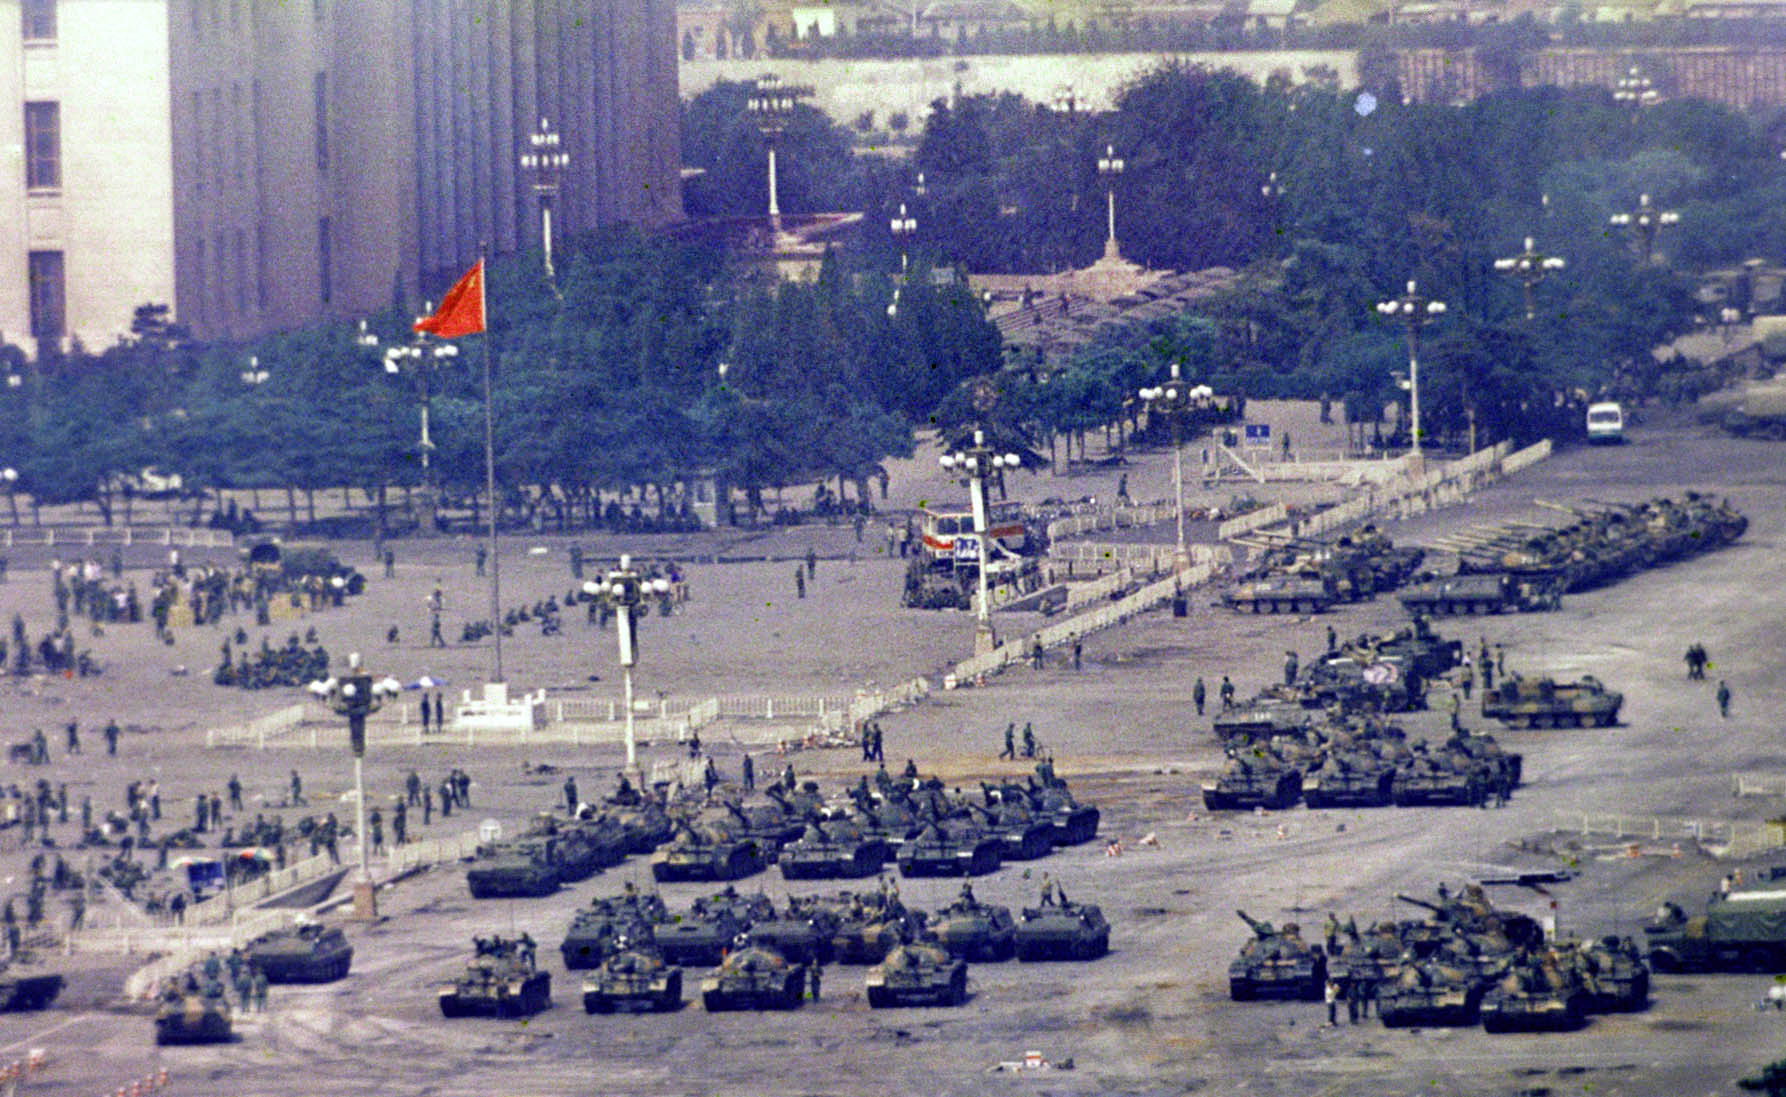 As It Happened June 4 5 1989 Tanks Rumble Out Of Tiananmen Square The Times Of Israel